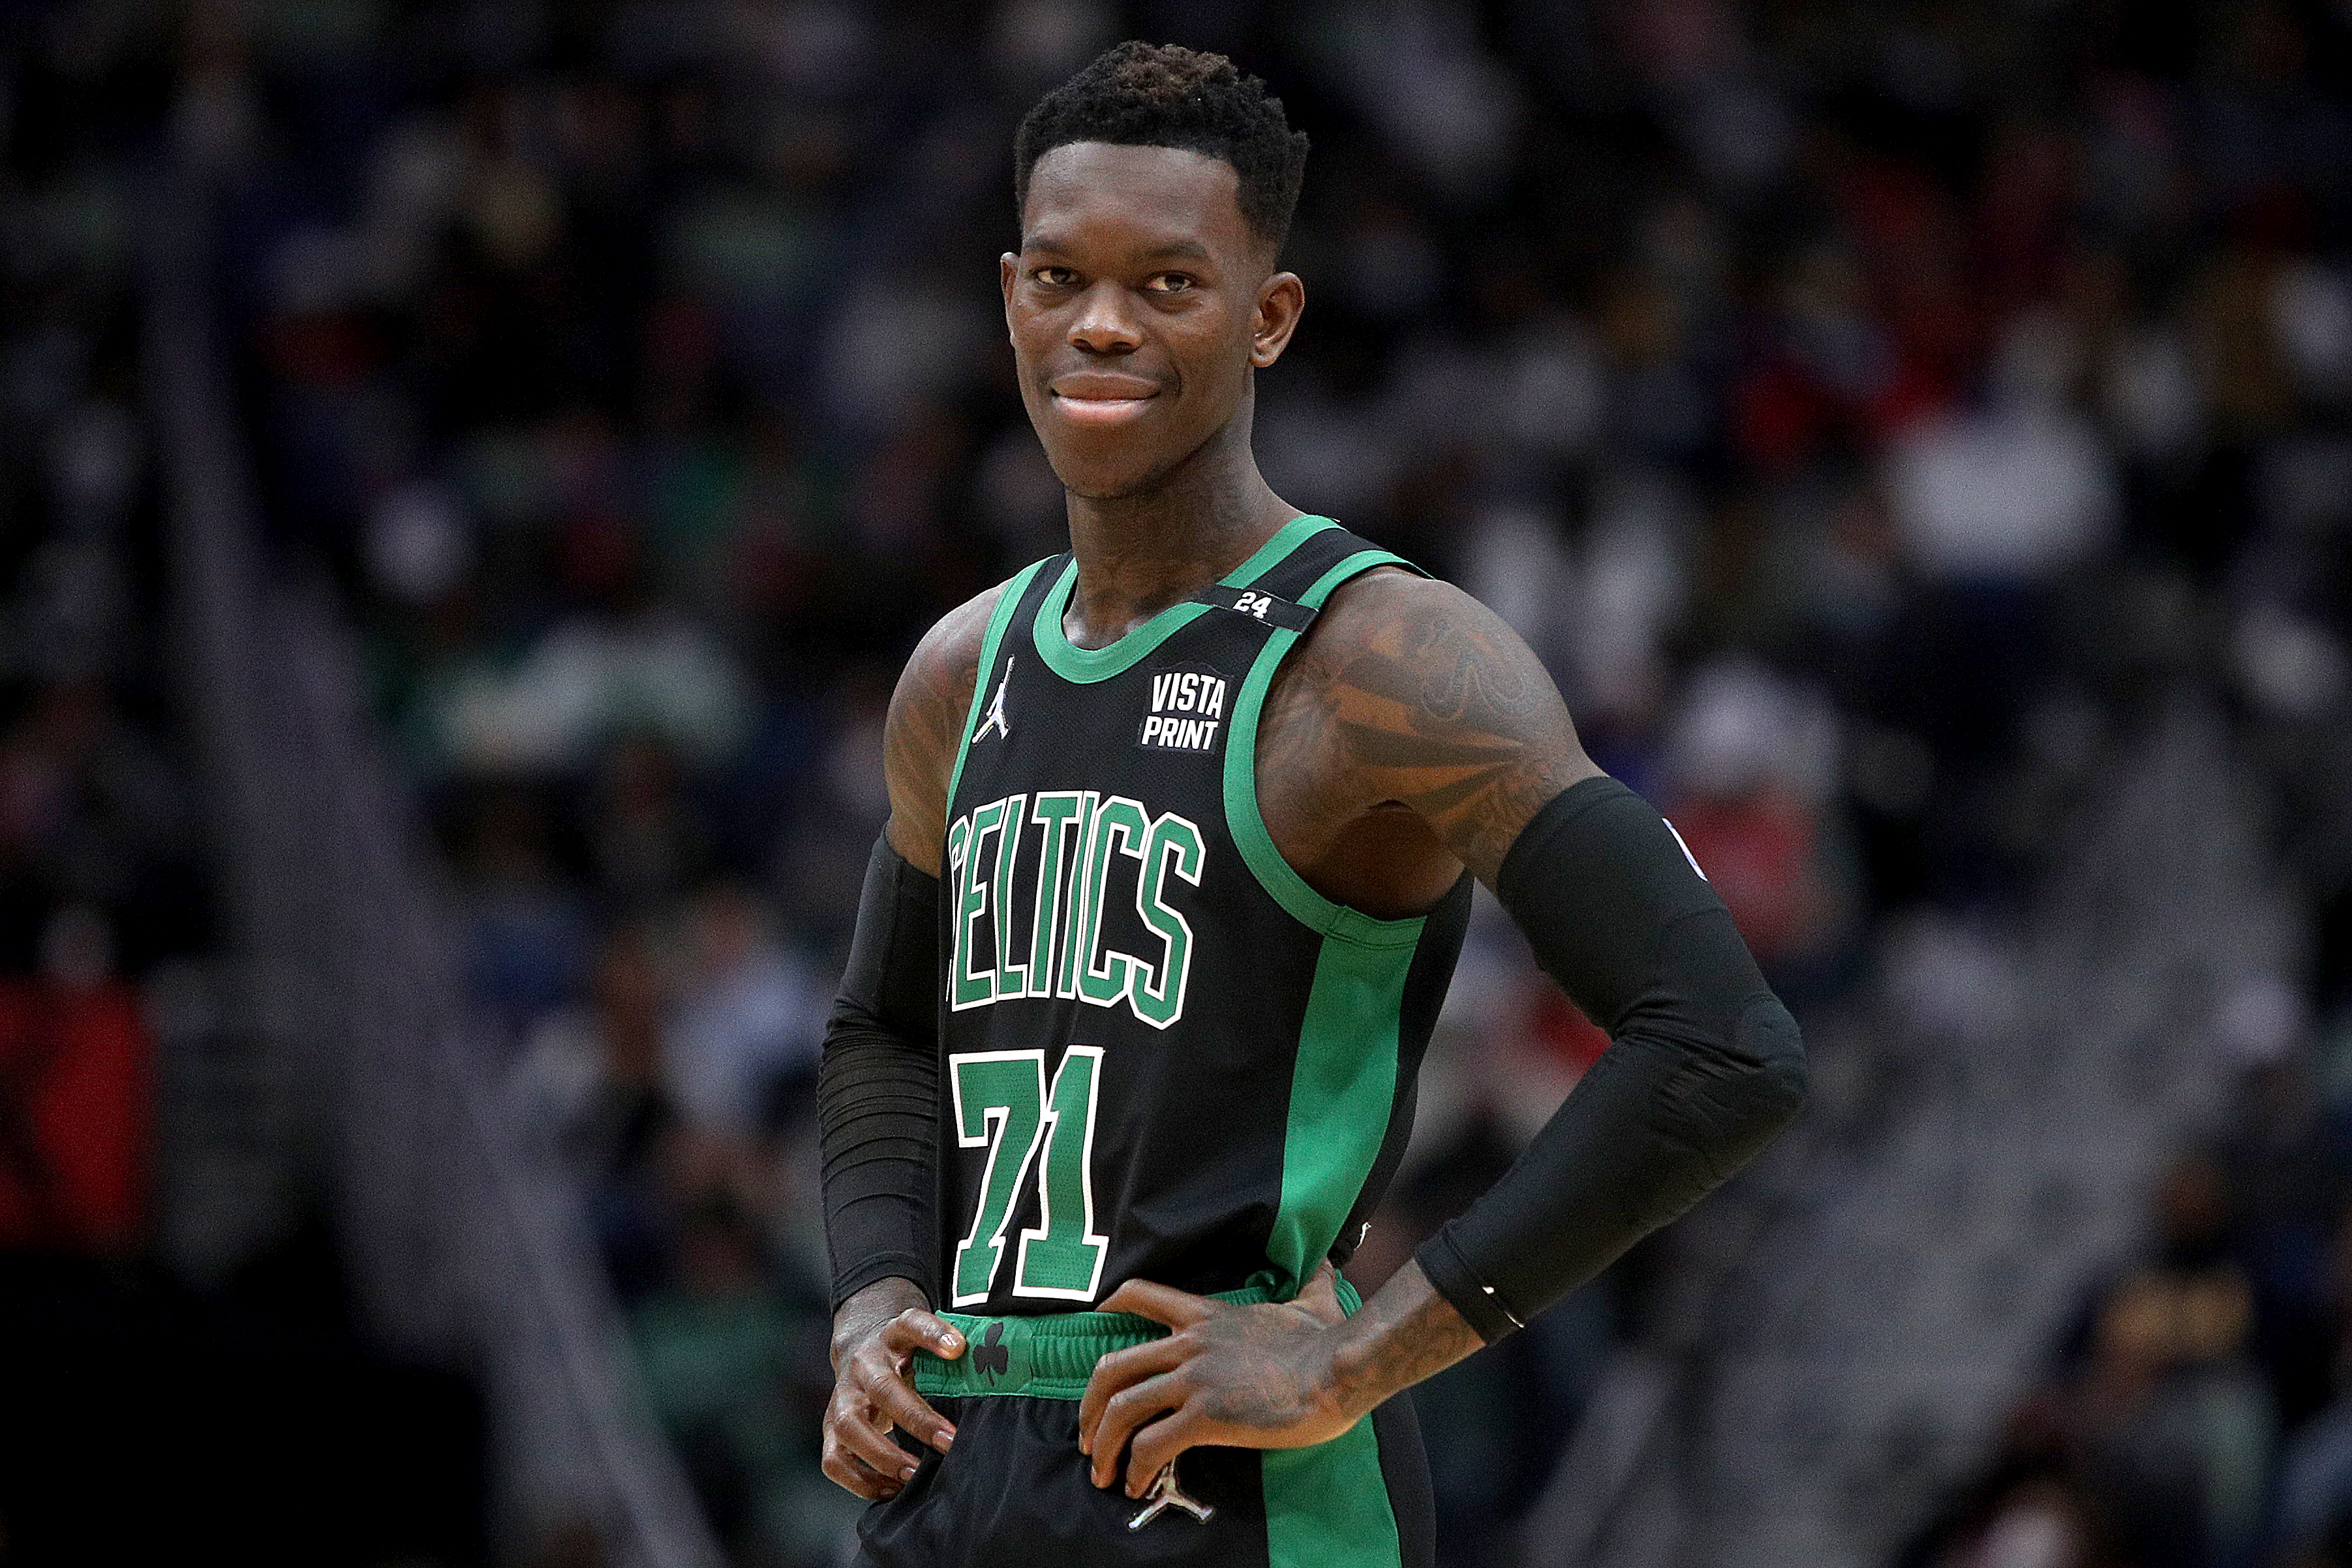 The sneakers of Dennis Schroder of the Boston Celtics Puma are shown  News Photo - Getty Images